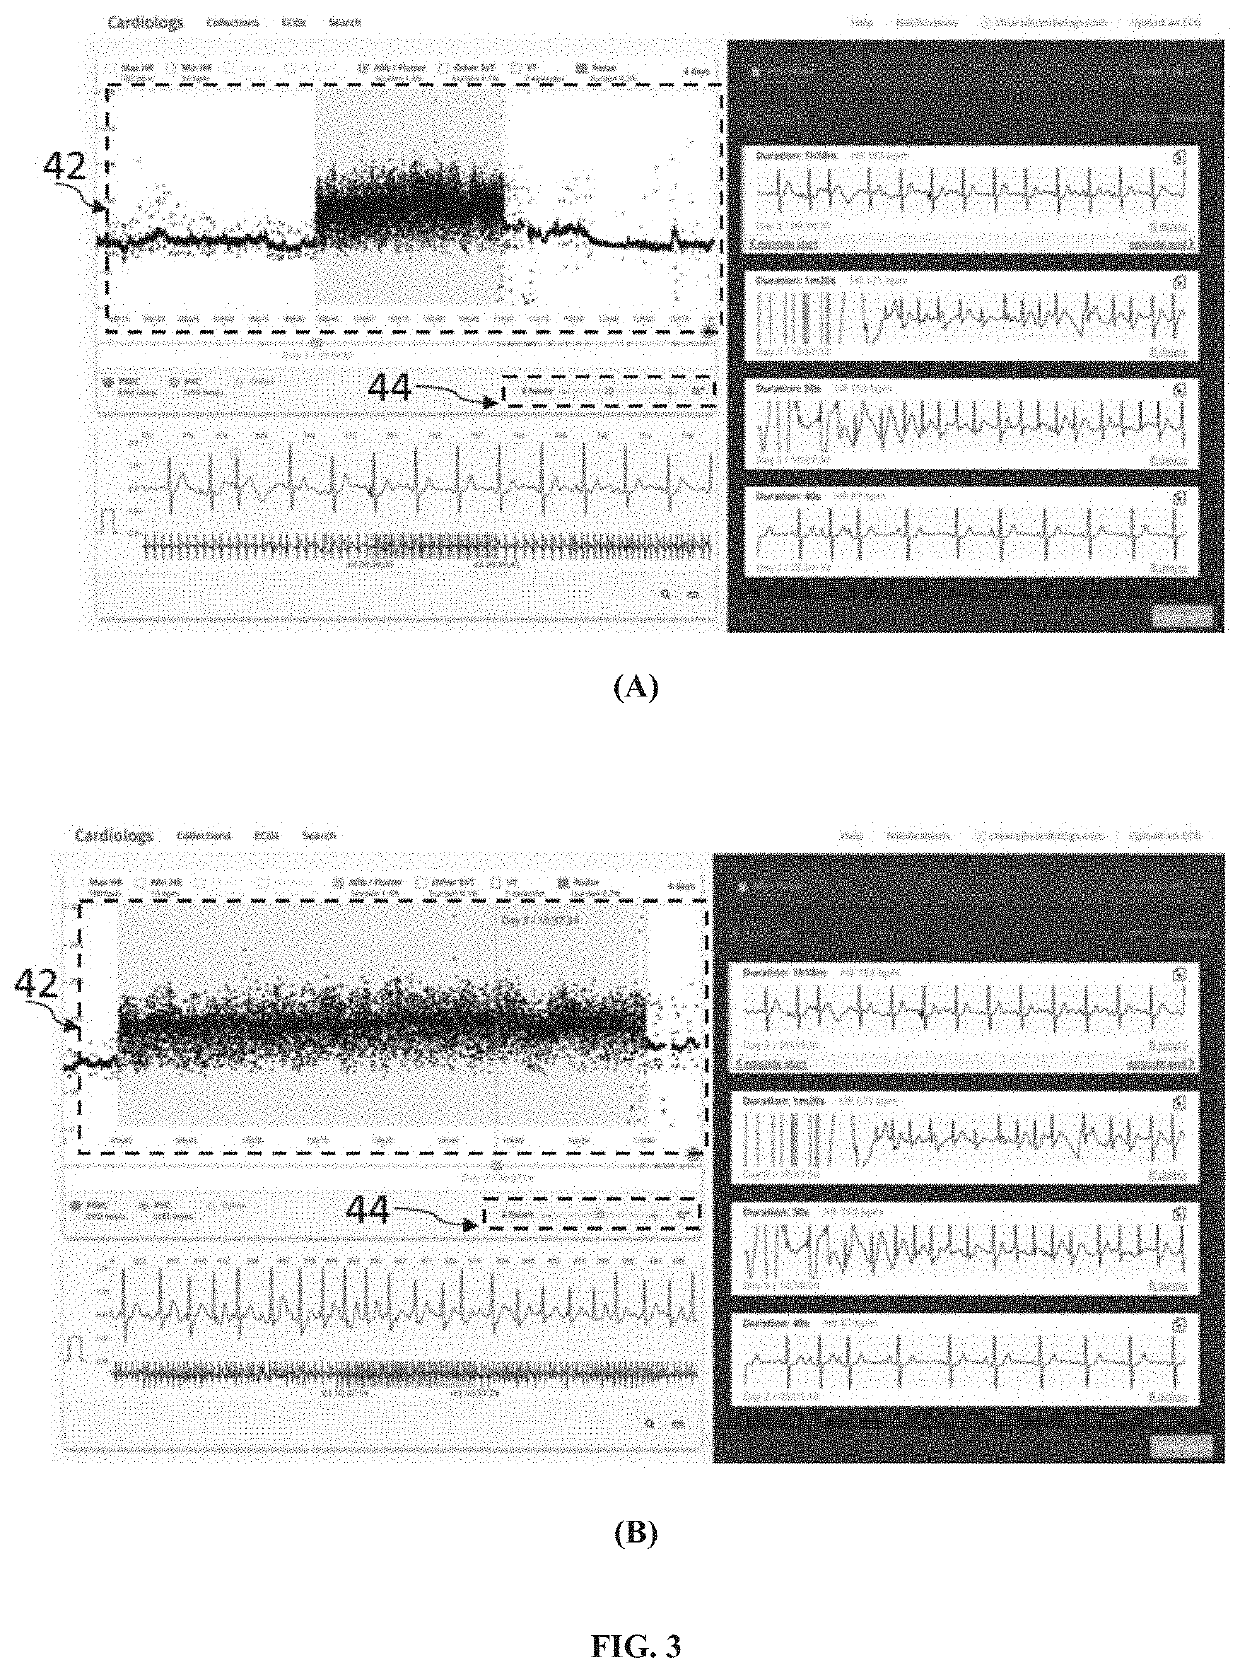 User interface for analysis of electrocardiograms